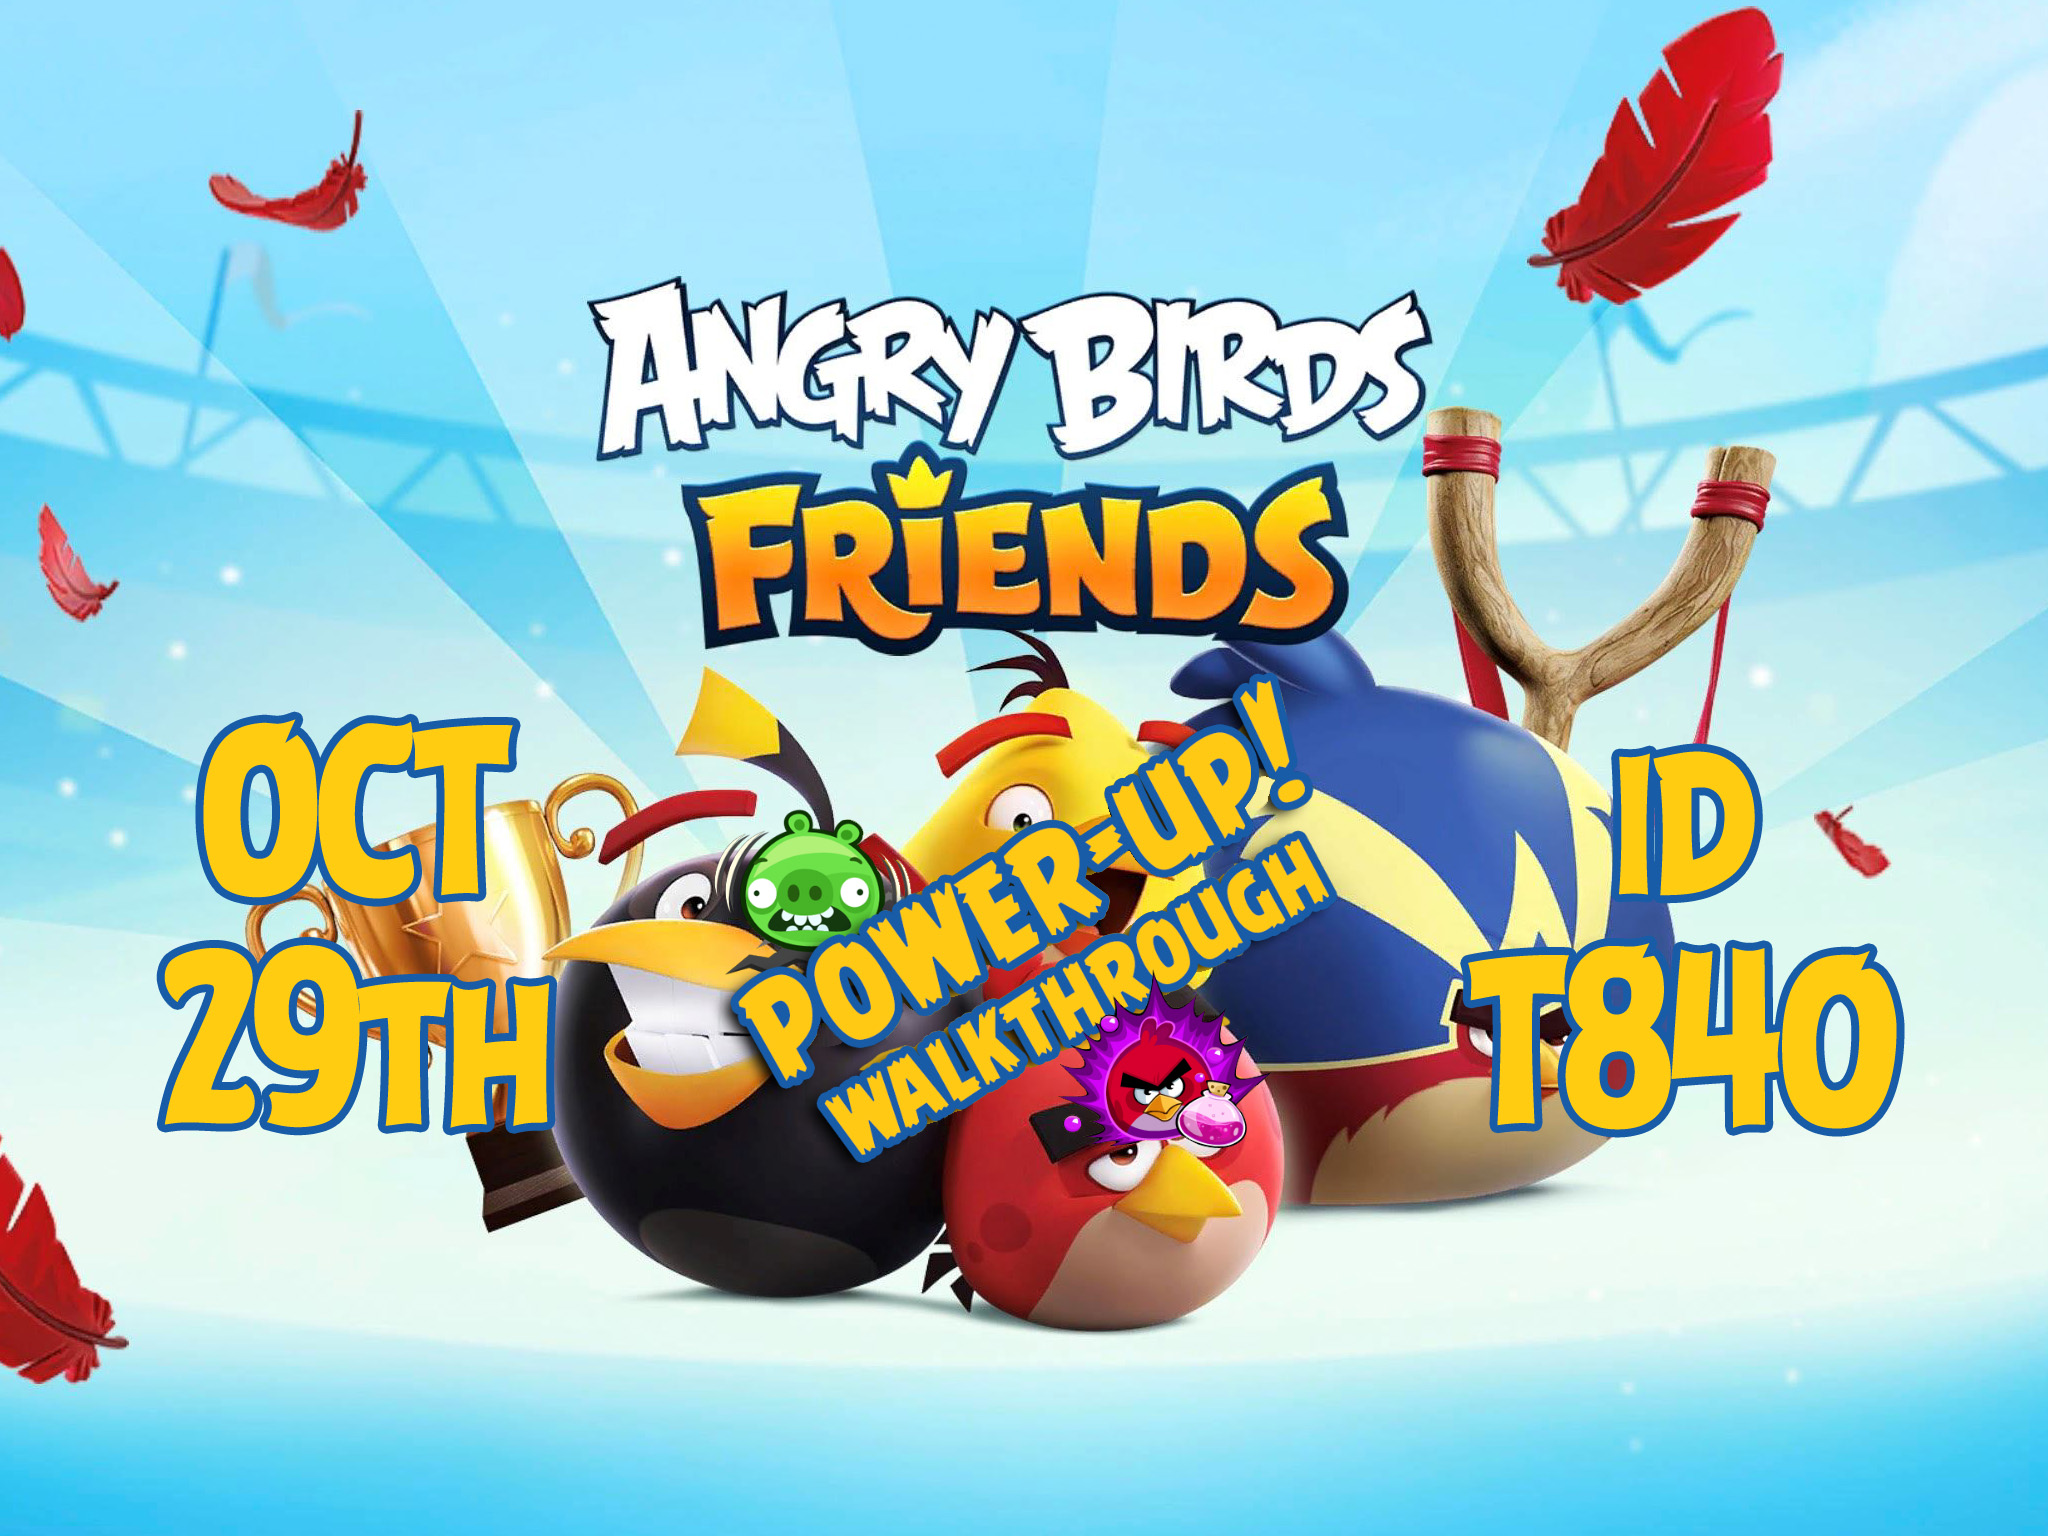 Angry-Birds-Friends-Tournament-T840-Feature-Image-PU